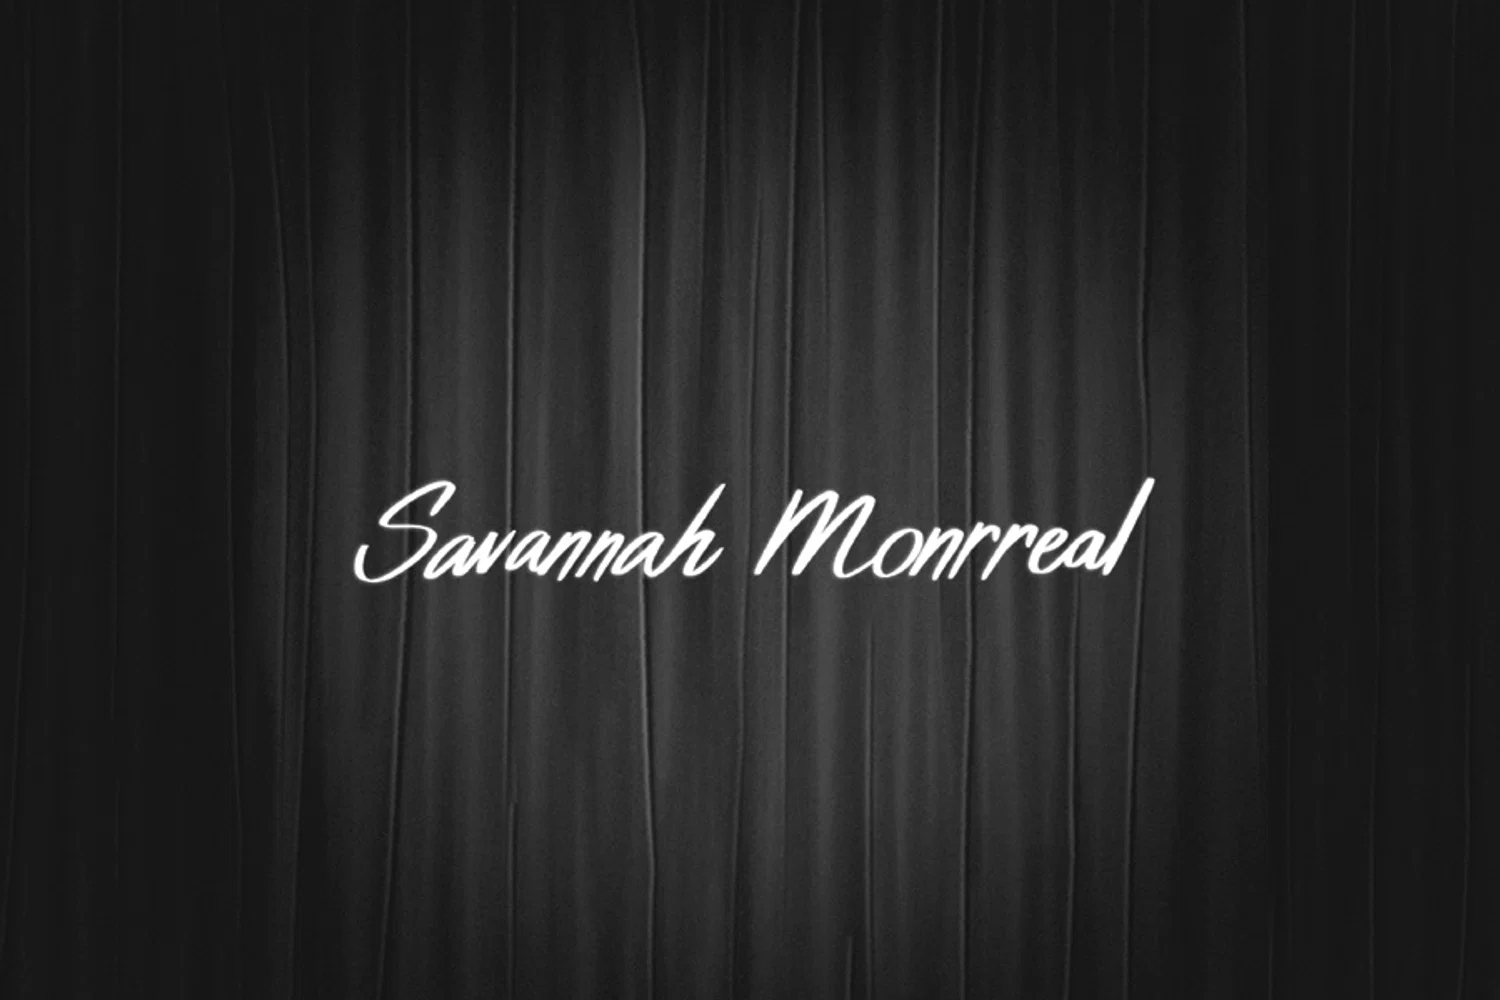 Dark curtain backdrop with white cursive text "Savannah Monrreal" placed in the center